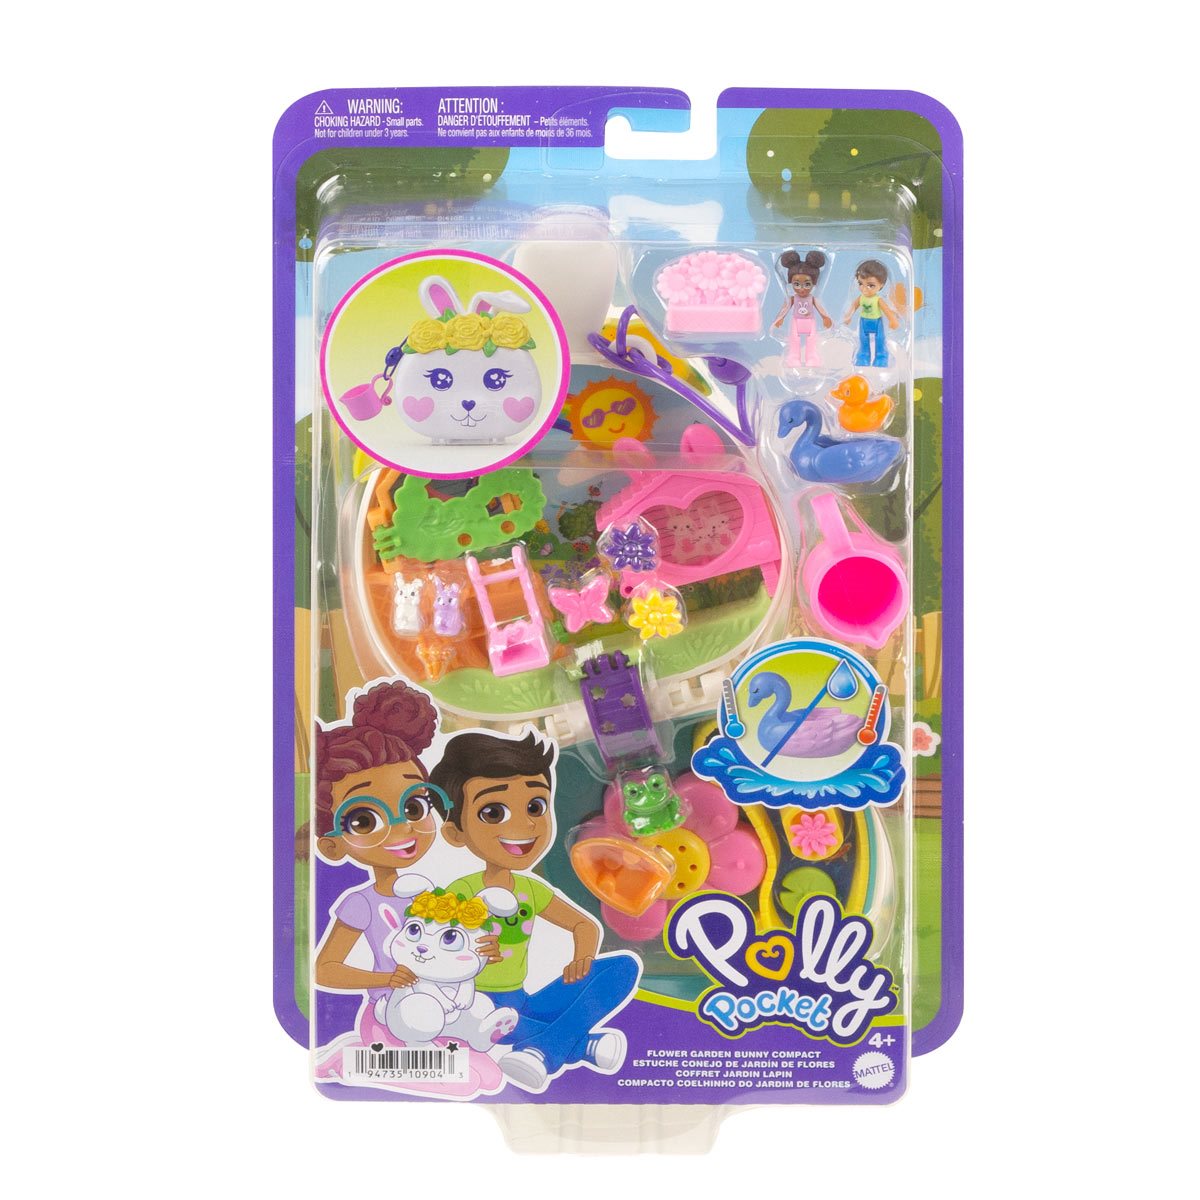 Polly Pocket Monster High compact 